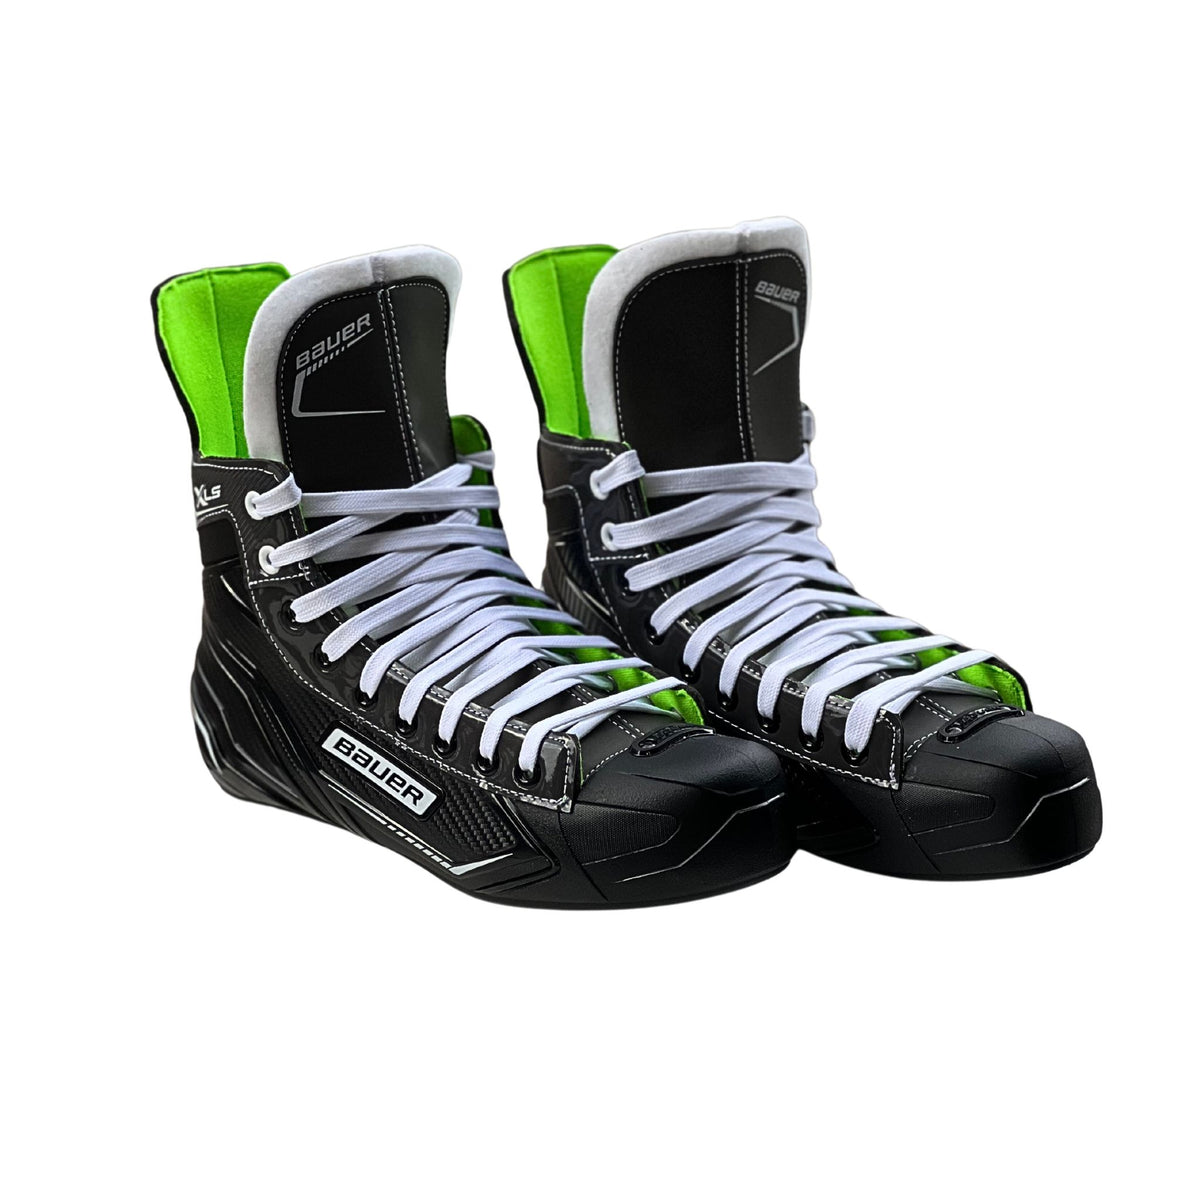 Bauer X-LS Boots - Pair of Boots only -Roller Skates | JT Skate